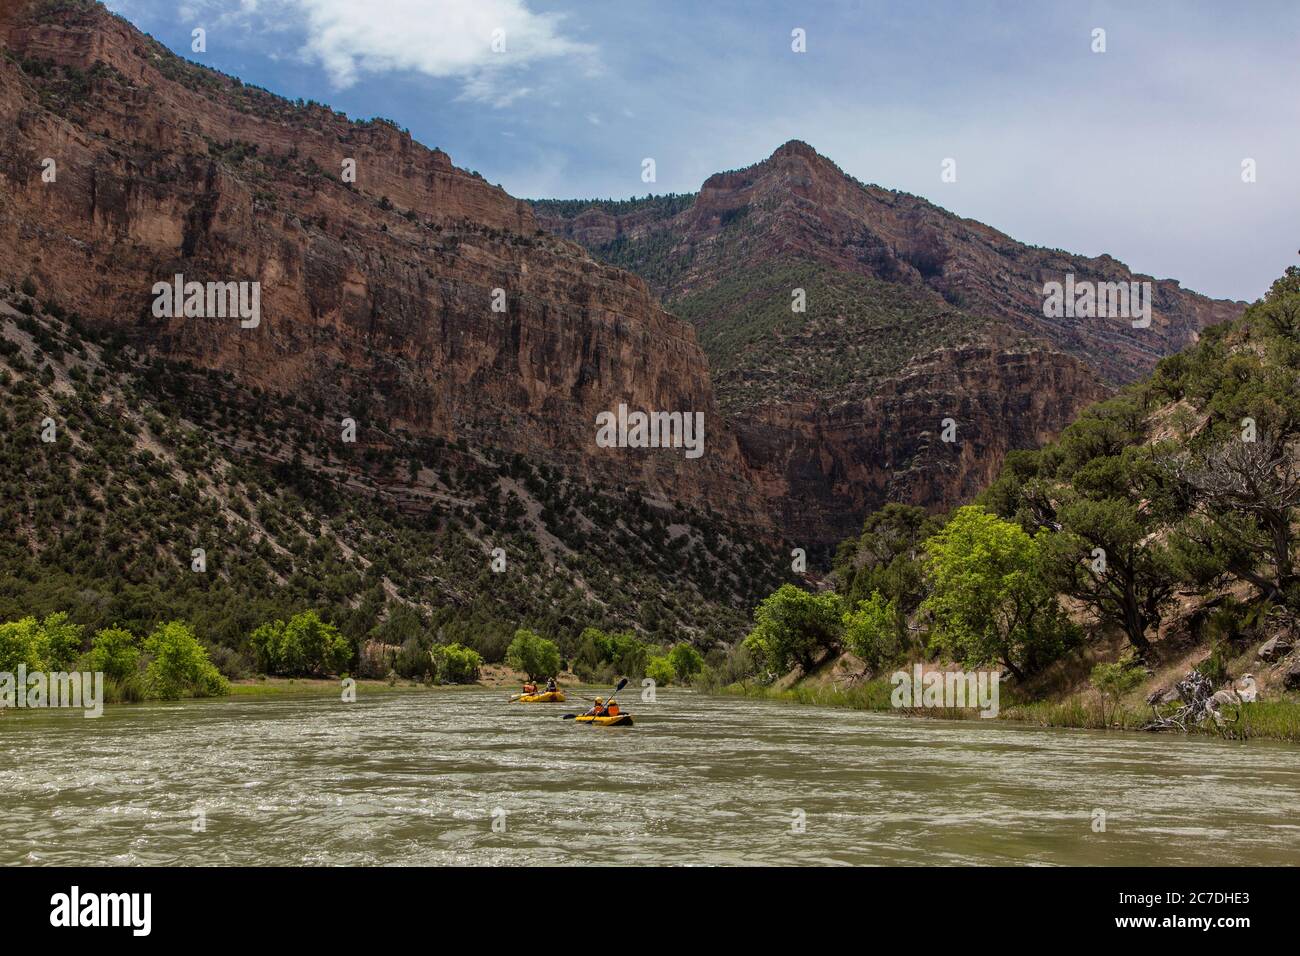 USA, Colorado, Dinosaur National Monument, Rafting durch die Tore Ladores am Green River. Stockfoto